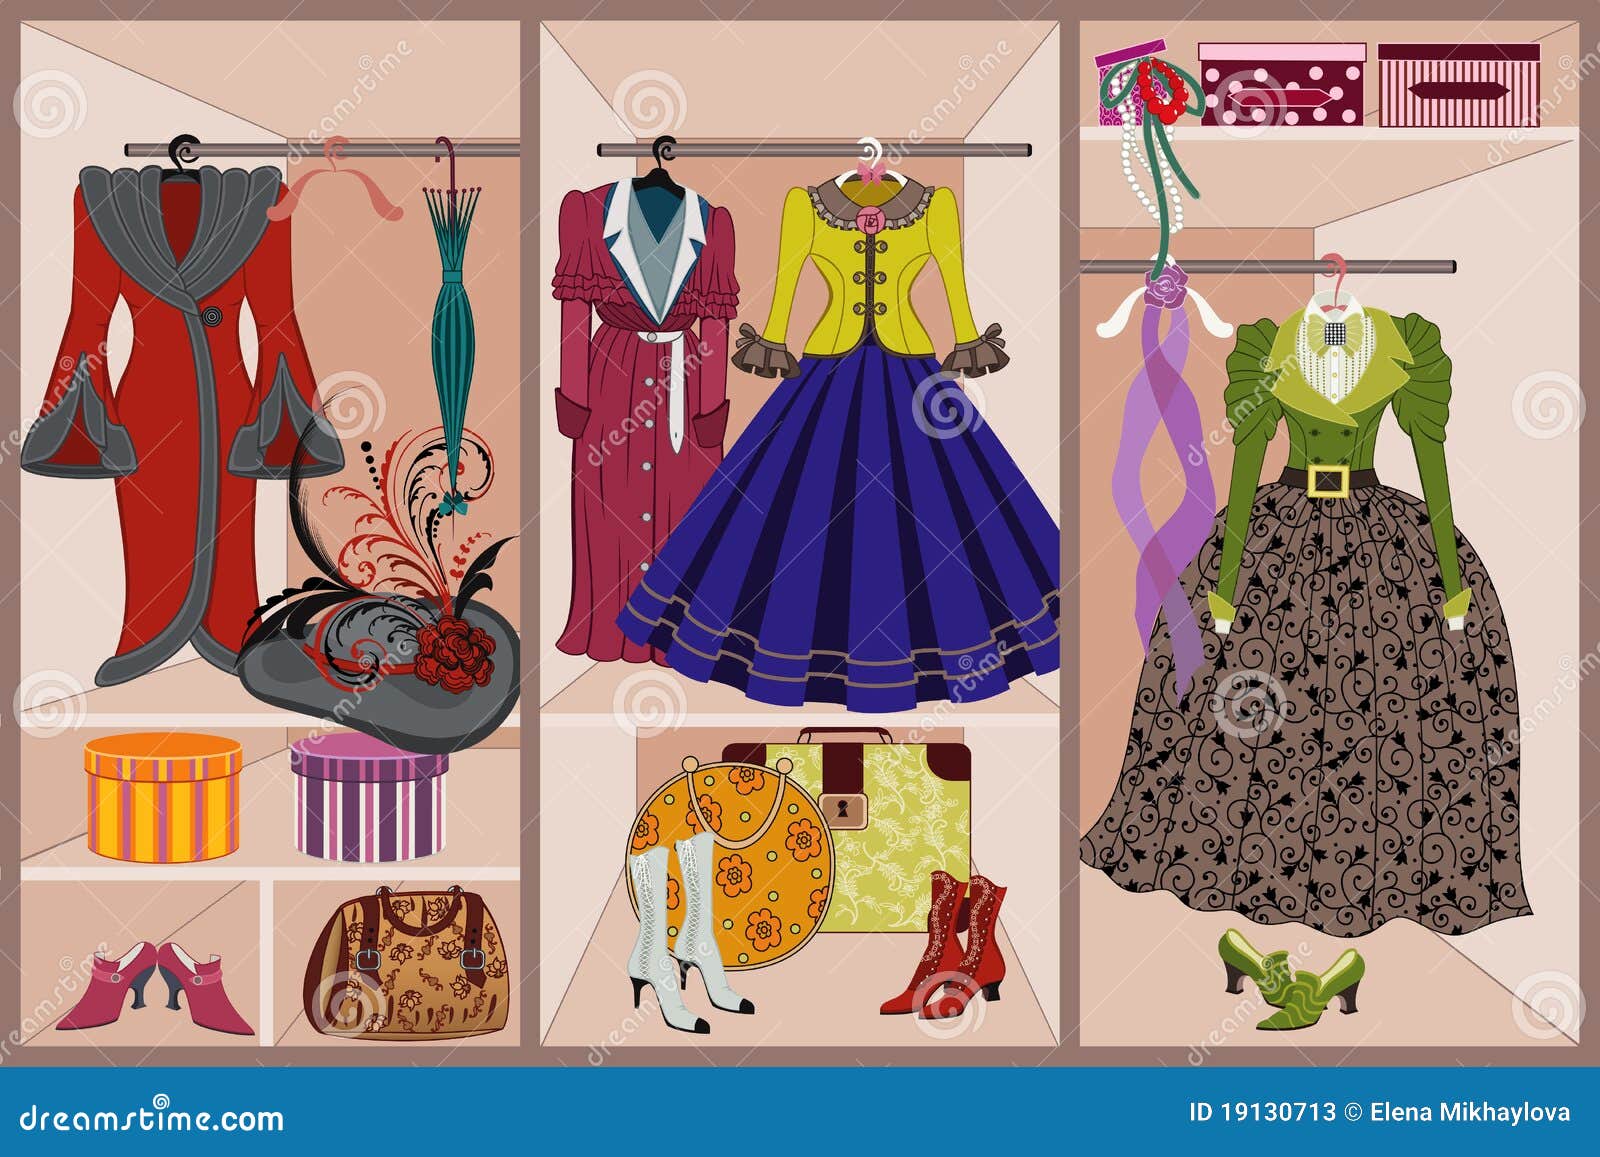 133,991 Clothing Clip Art Royalty-Free Photos and Stock Images